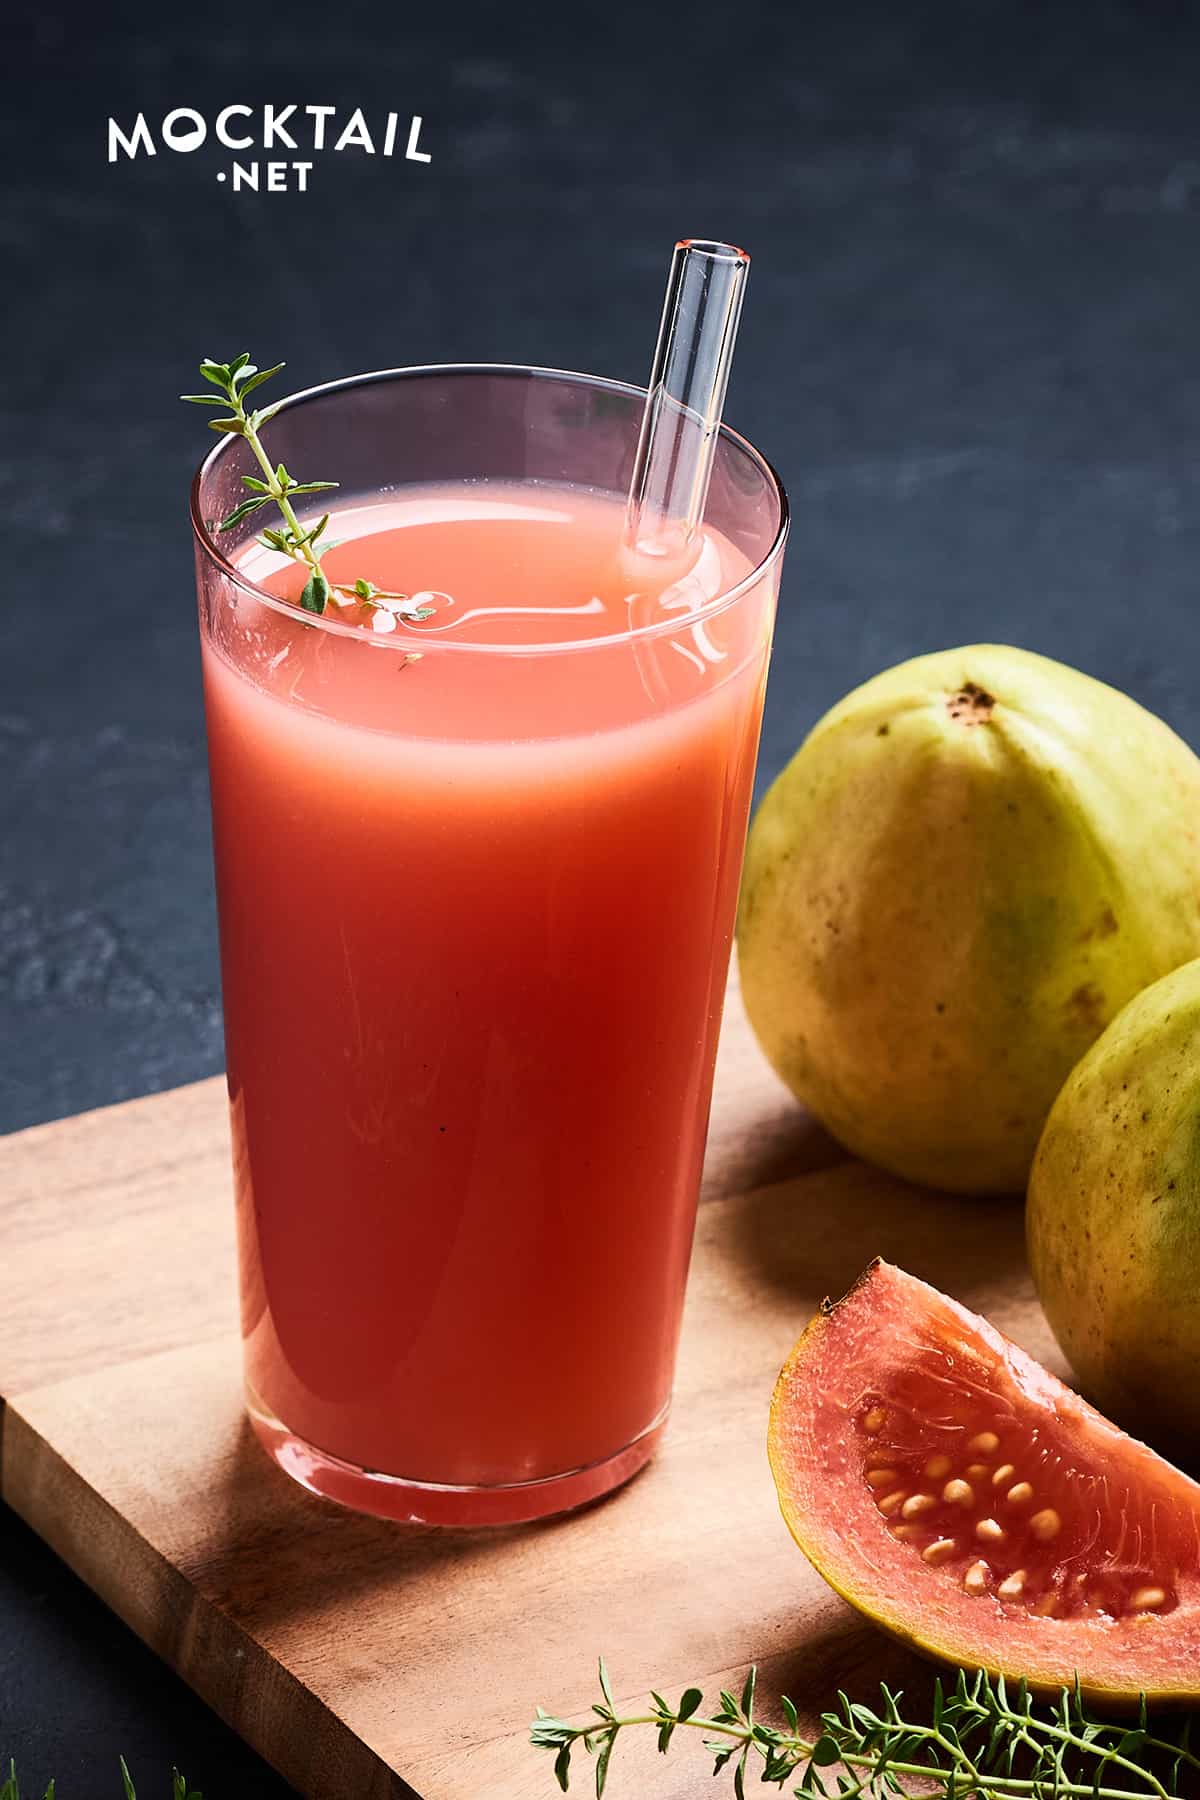 How to Make Guava Juice